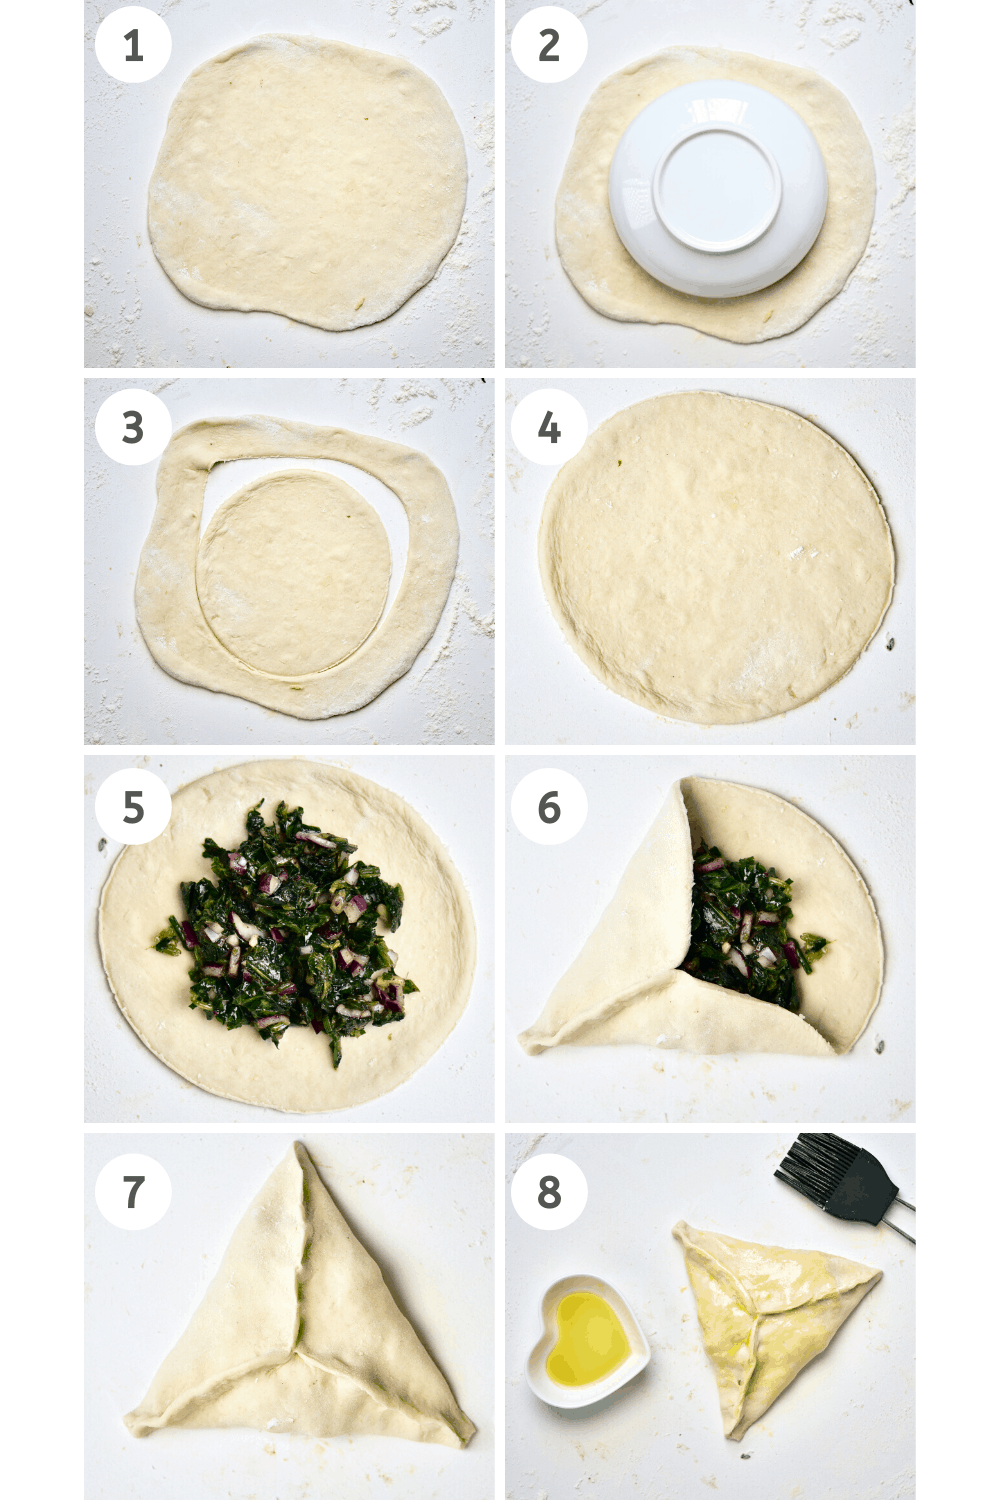 Spinach Fatayer steps to making the pies